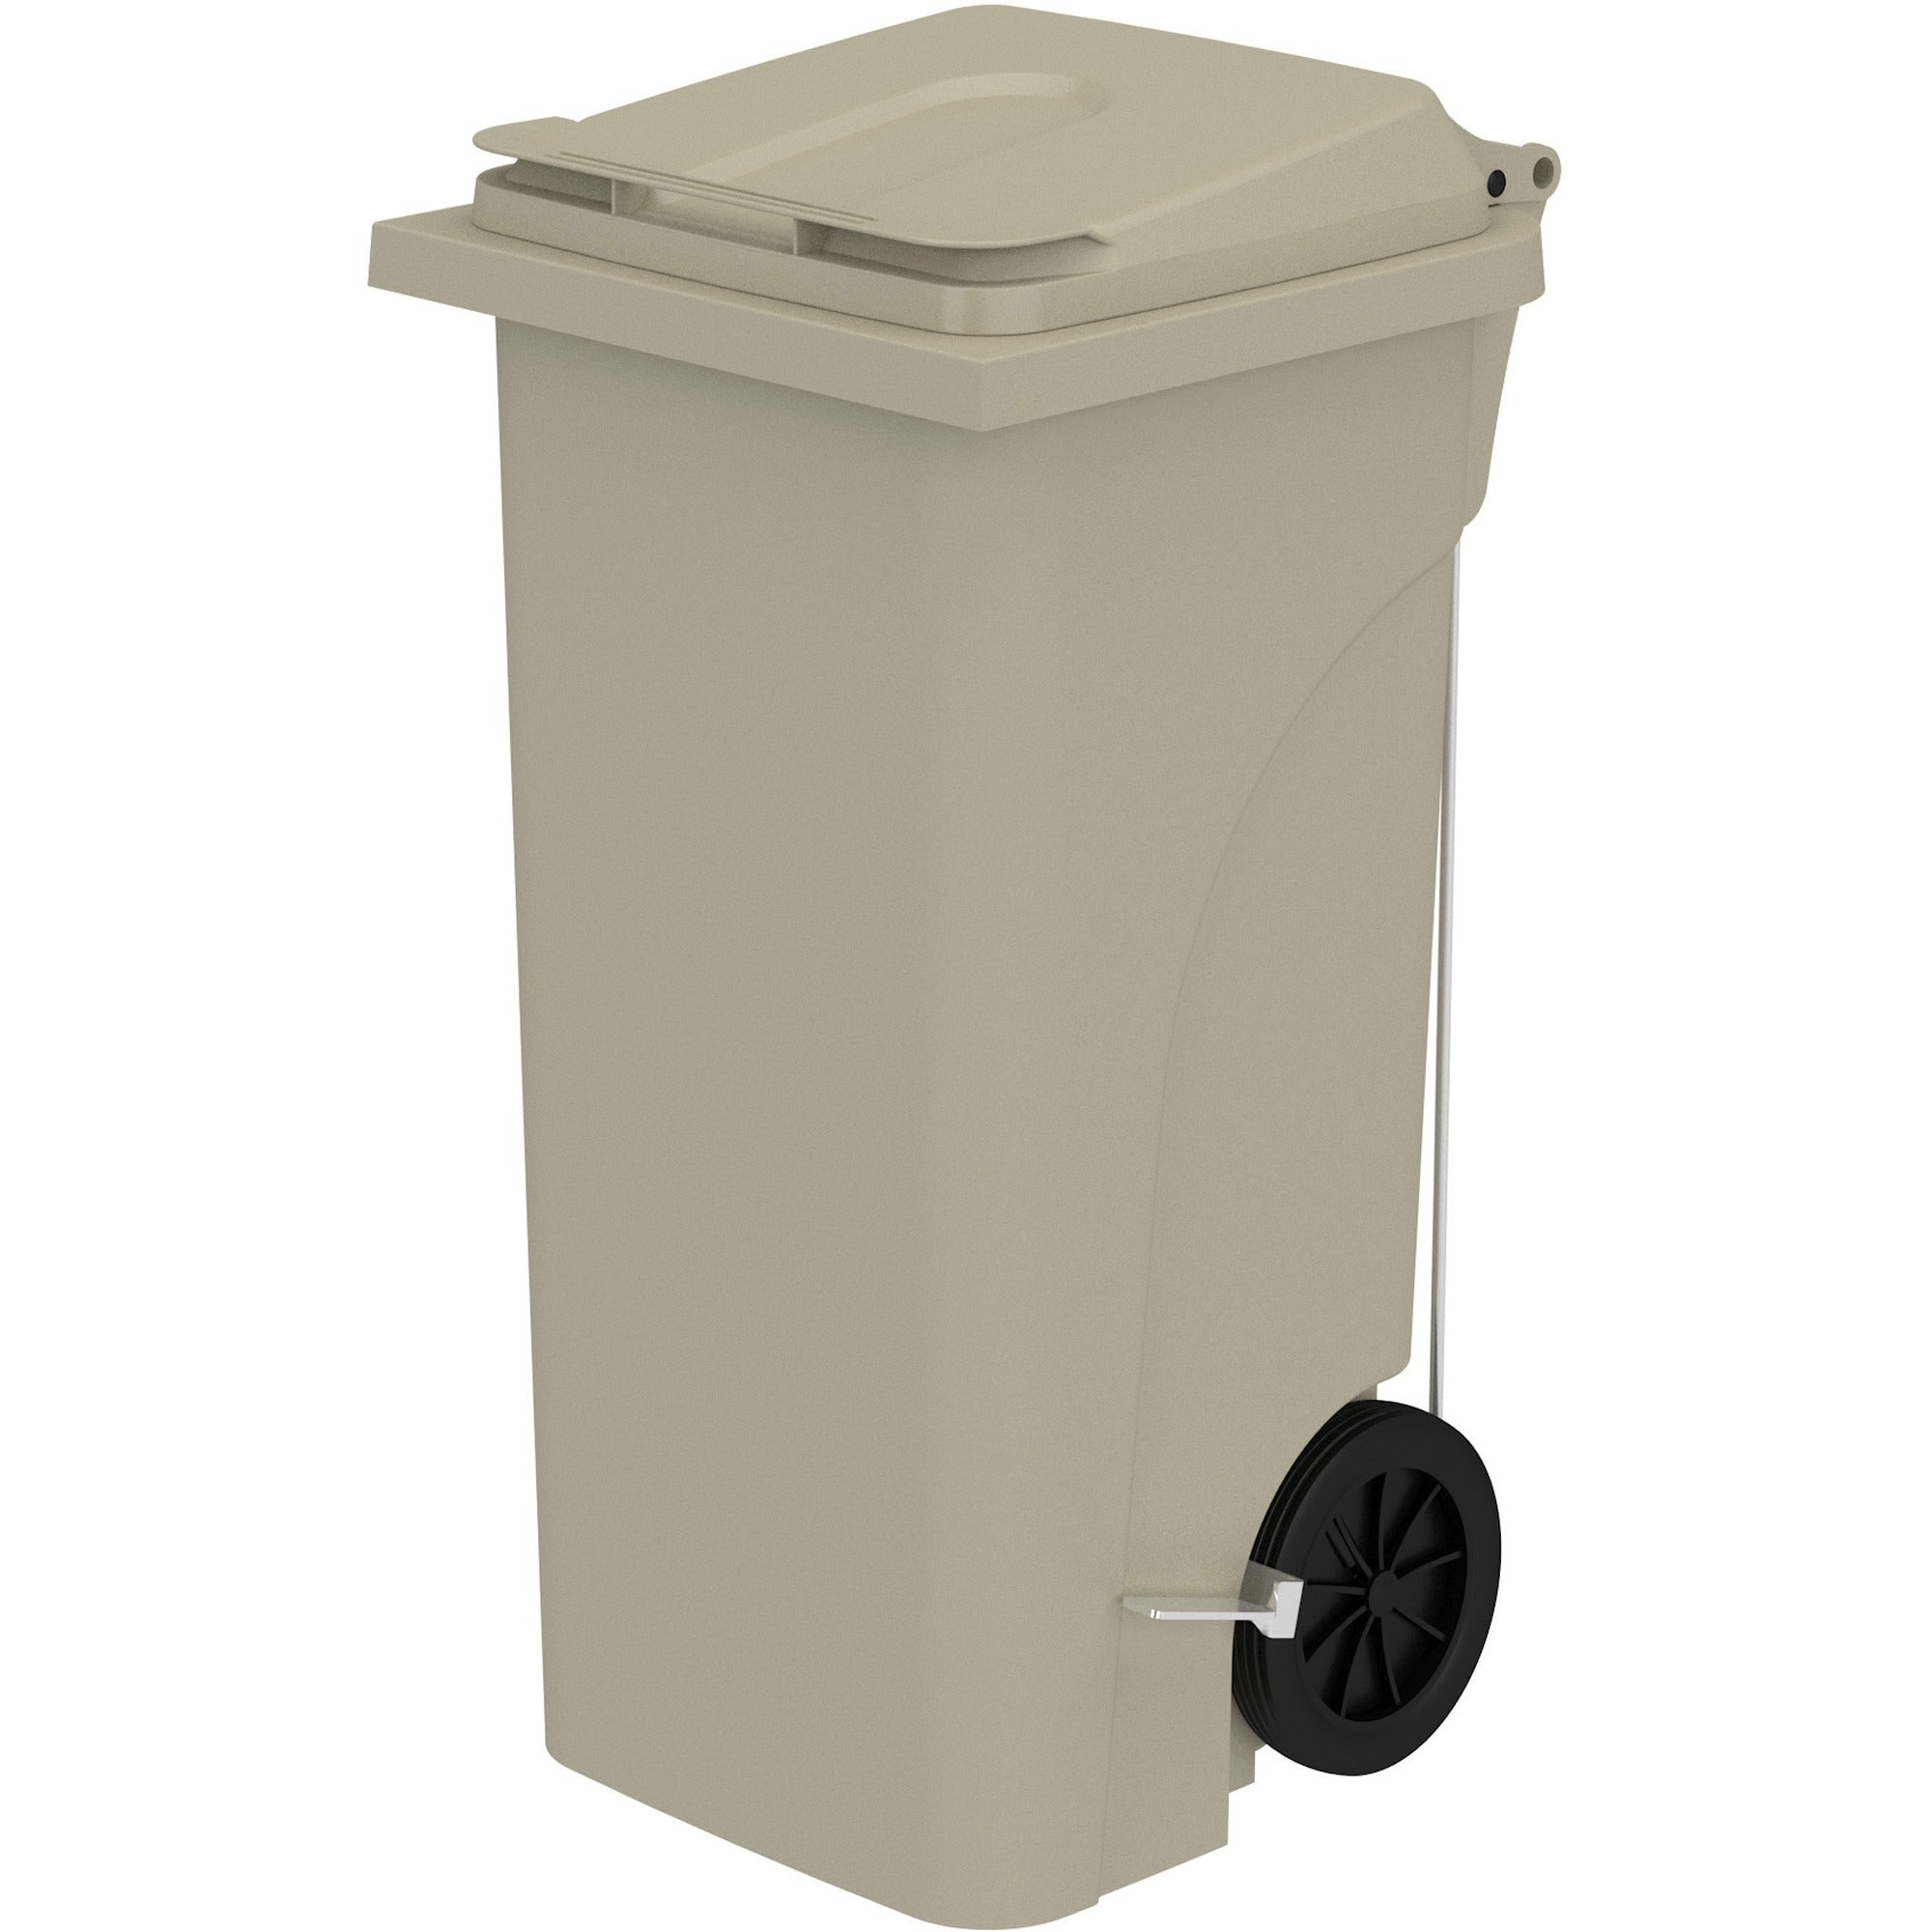 safco-32-gallon-plastic-step-on-receptacle-32-gal-capacity-foot-pedal-lightweight-easy-to-clean-handle-wheels-mobility-37-height-x-213-width-x-20-depth-plastic-tan-1-carton_saf9926tn - 1